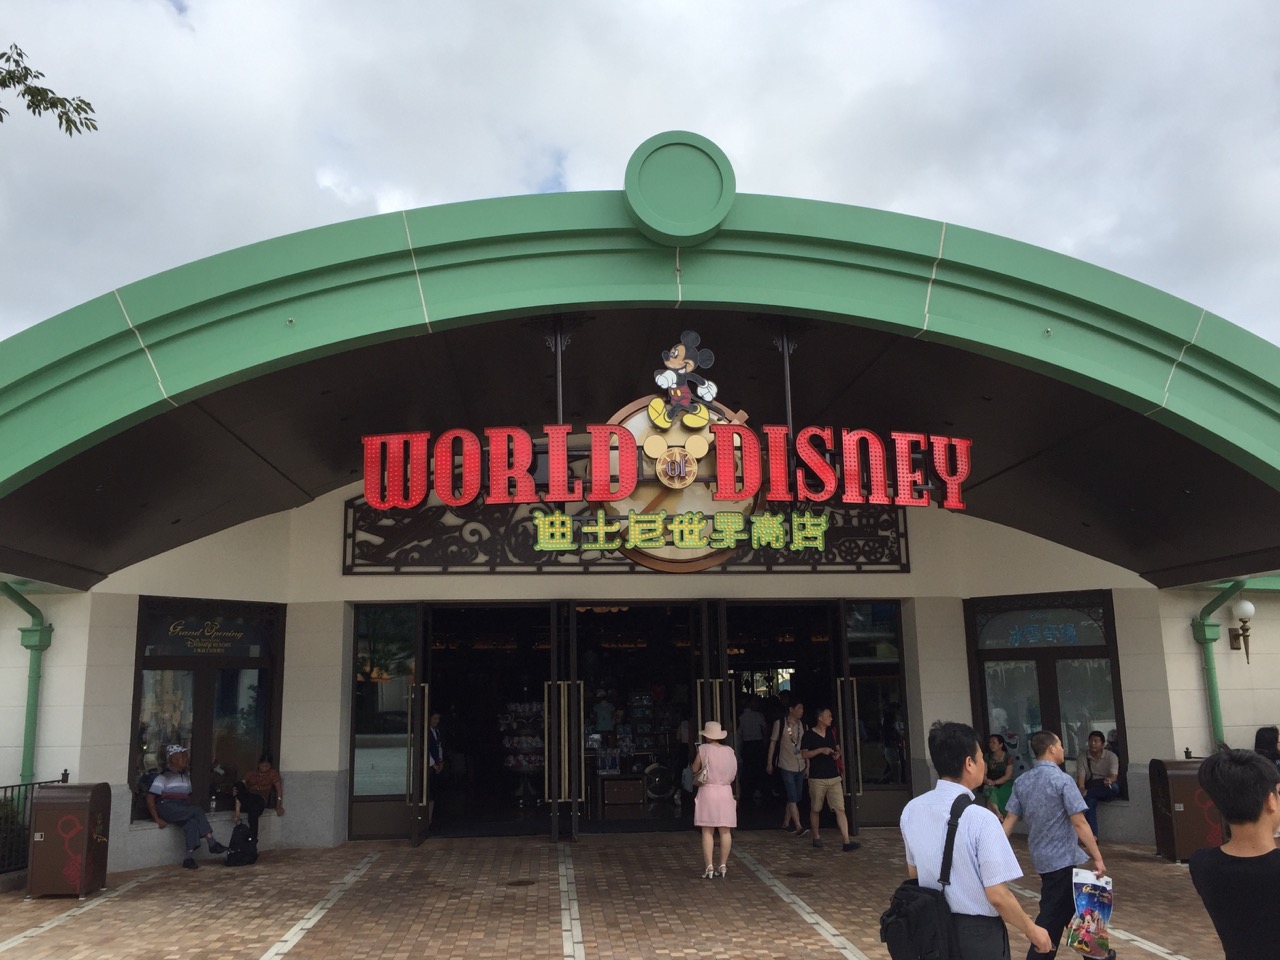 World of Disney Entrance in Disney Town. You can find almost everything there. Photo by J. Jeff Kober.